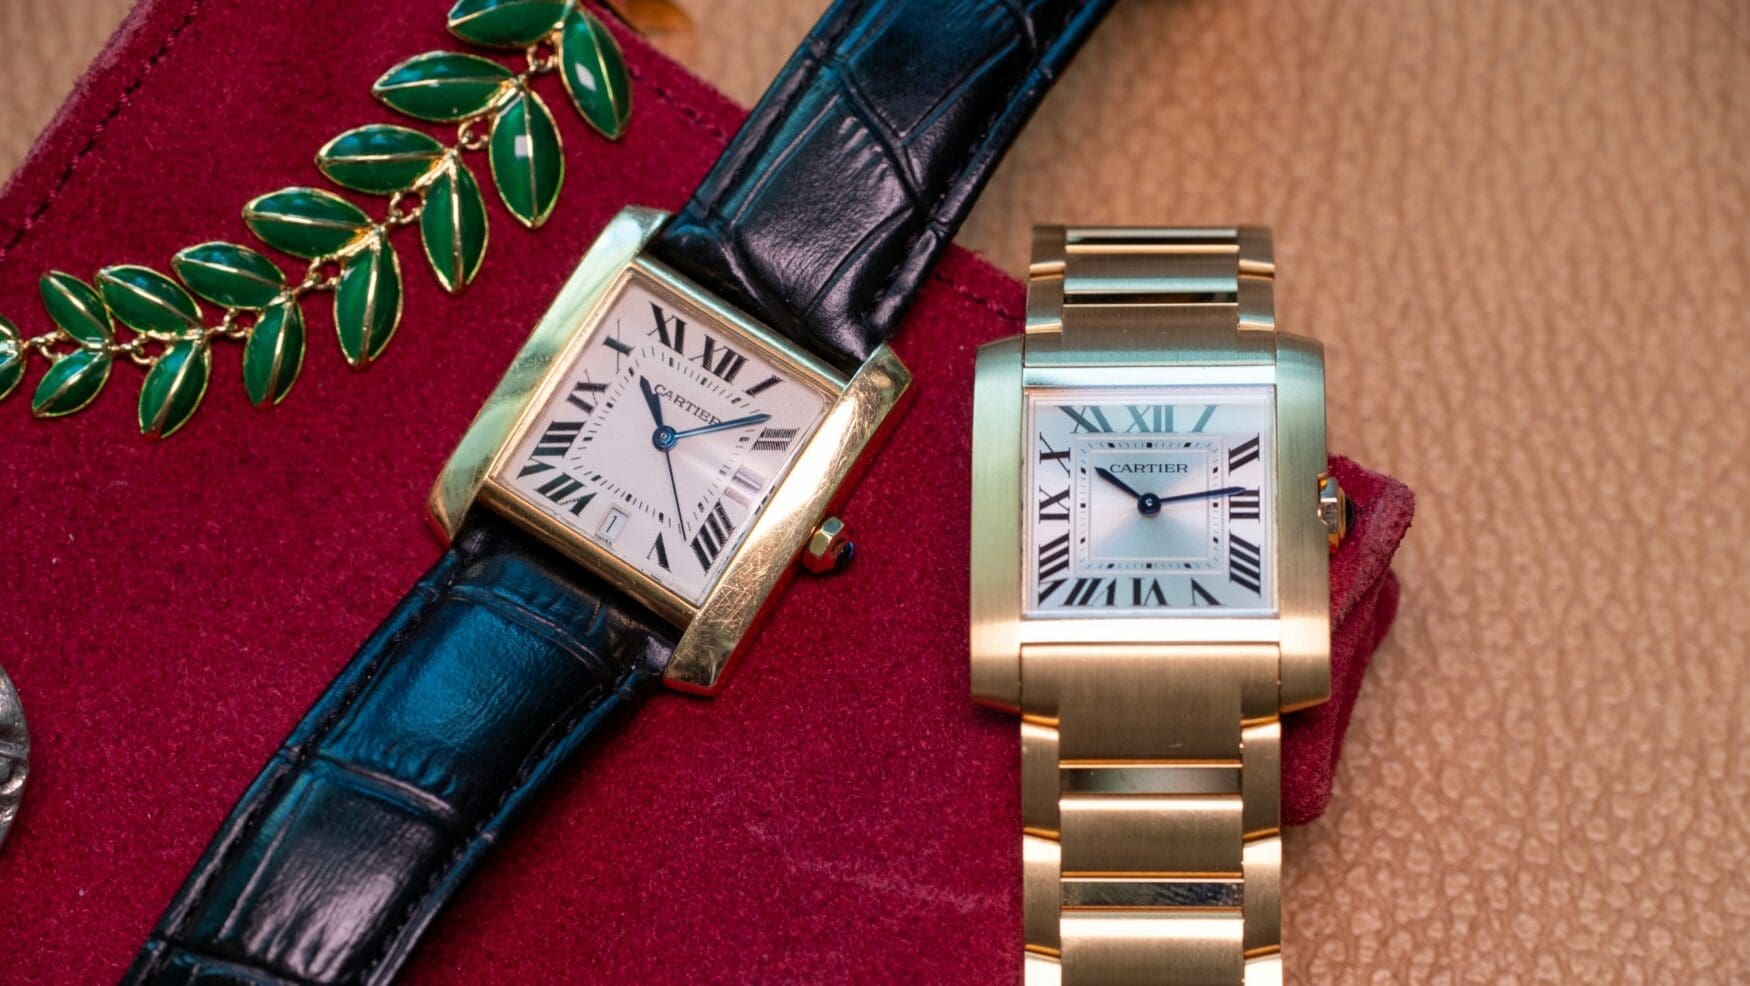 How the Cartier Tank Française changed over the decades